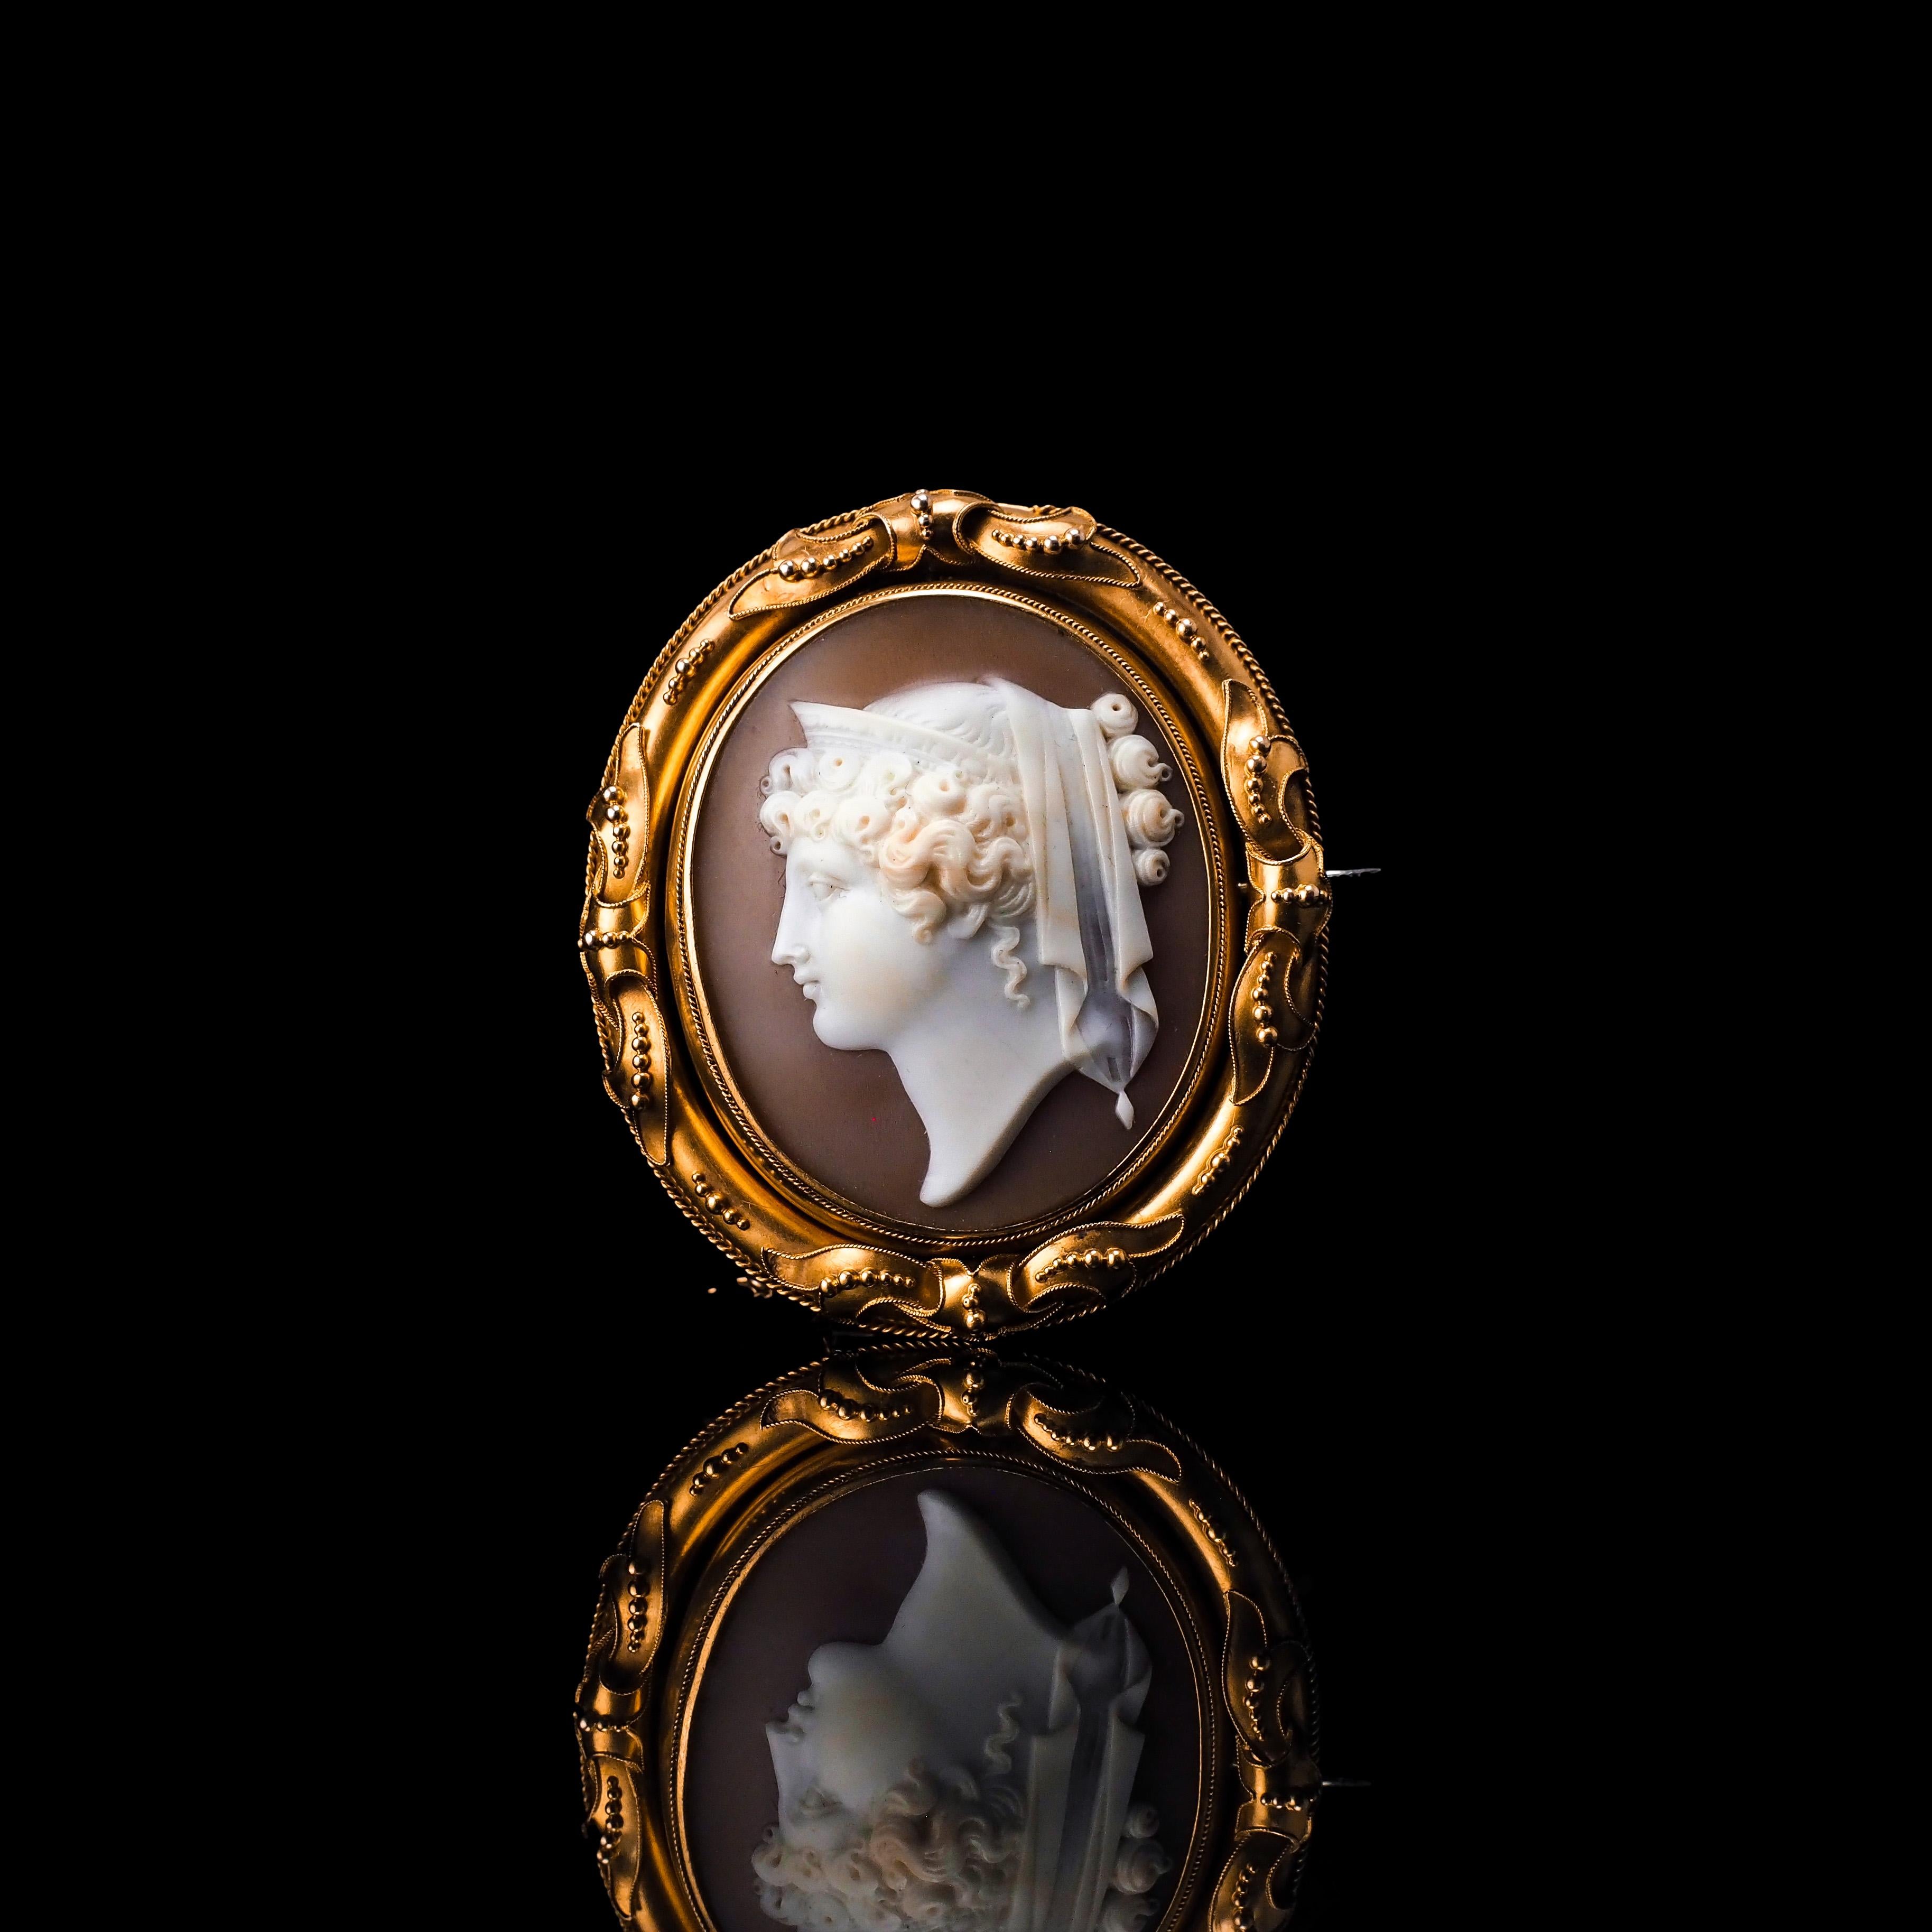 Antique Cameo Brooch Pendant Necklace 18K Gold - Victorian c.1860 For Sale 11